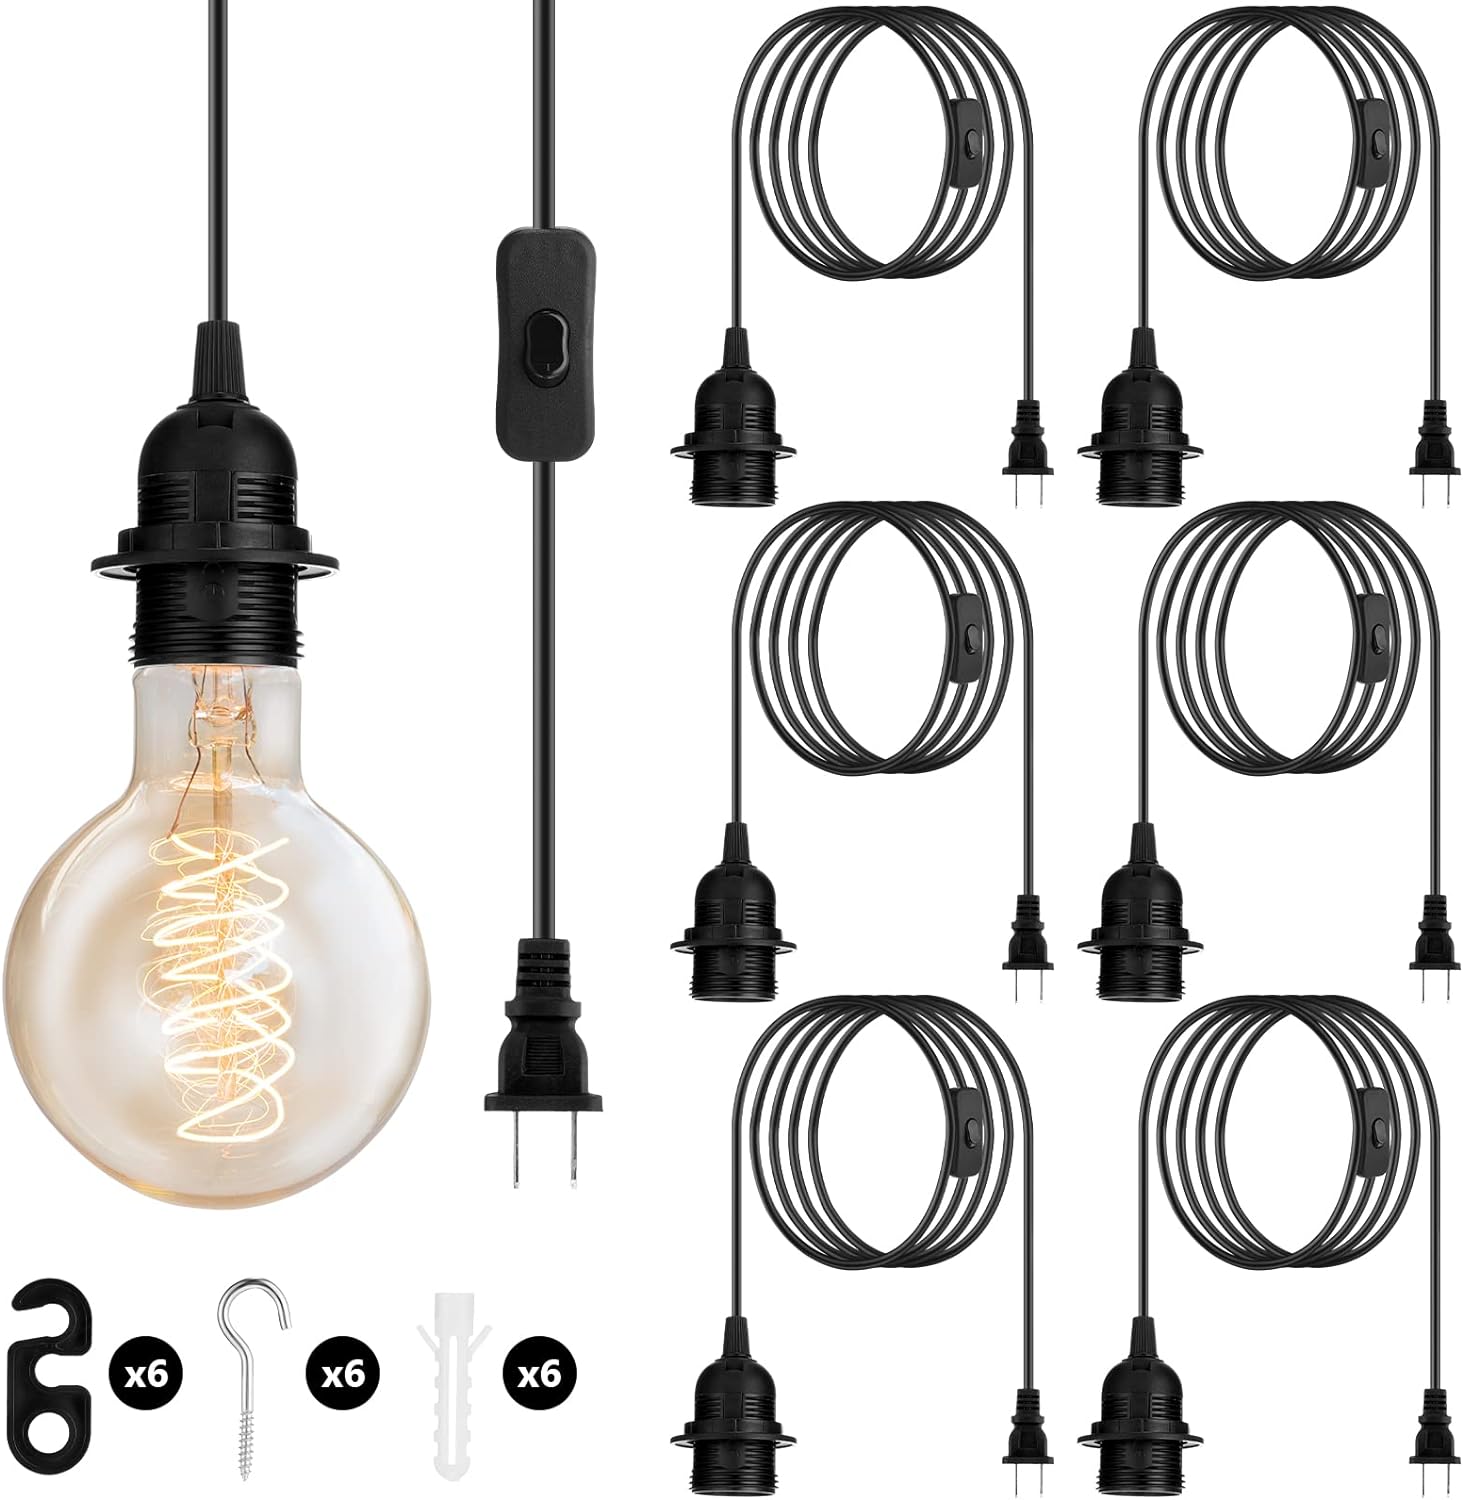 Reginary 6 Pieces Hanging Light Cord Kit Lantern Bulb Cord Cable Extension Plug in Pendant Light Cord with in-line On/Off Switch E27 Socket Lamp Kit for DIY Pendant Lamp(Black, 20 Feet/ 6 M)